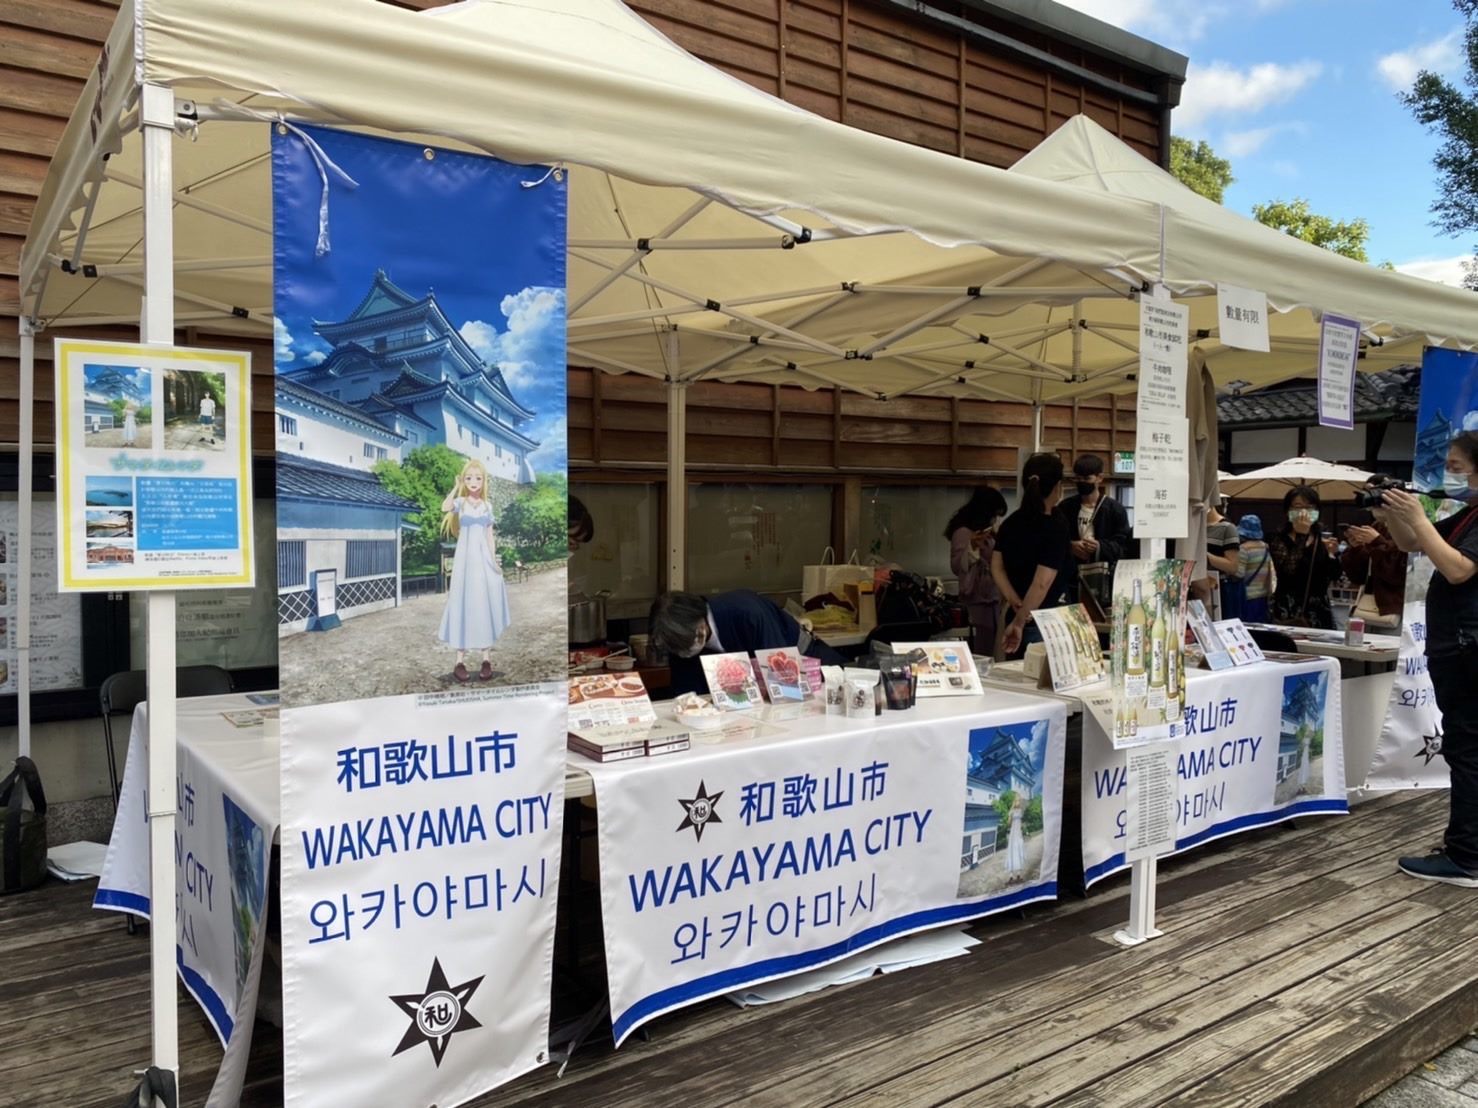 A stall promoting goods and specialties from Wakayama